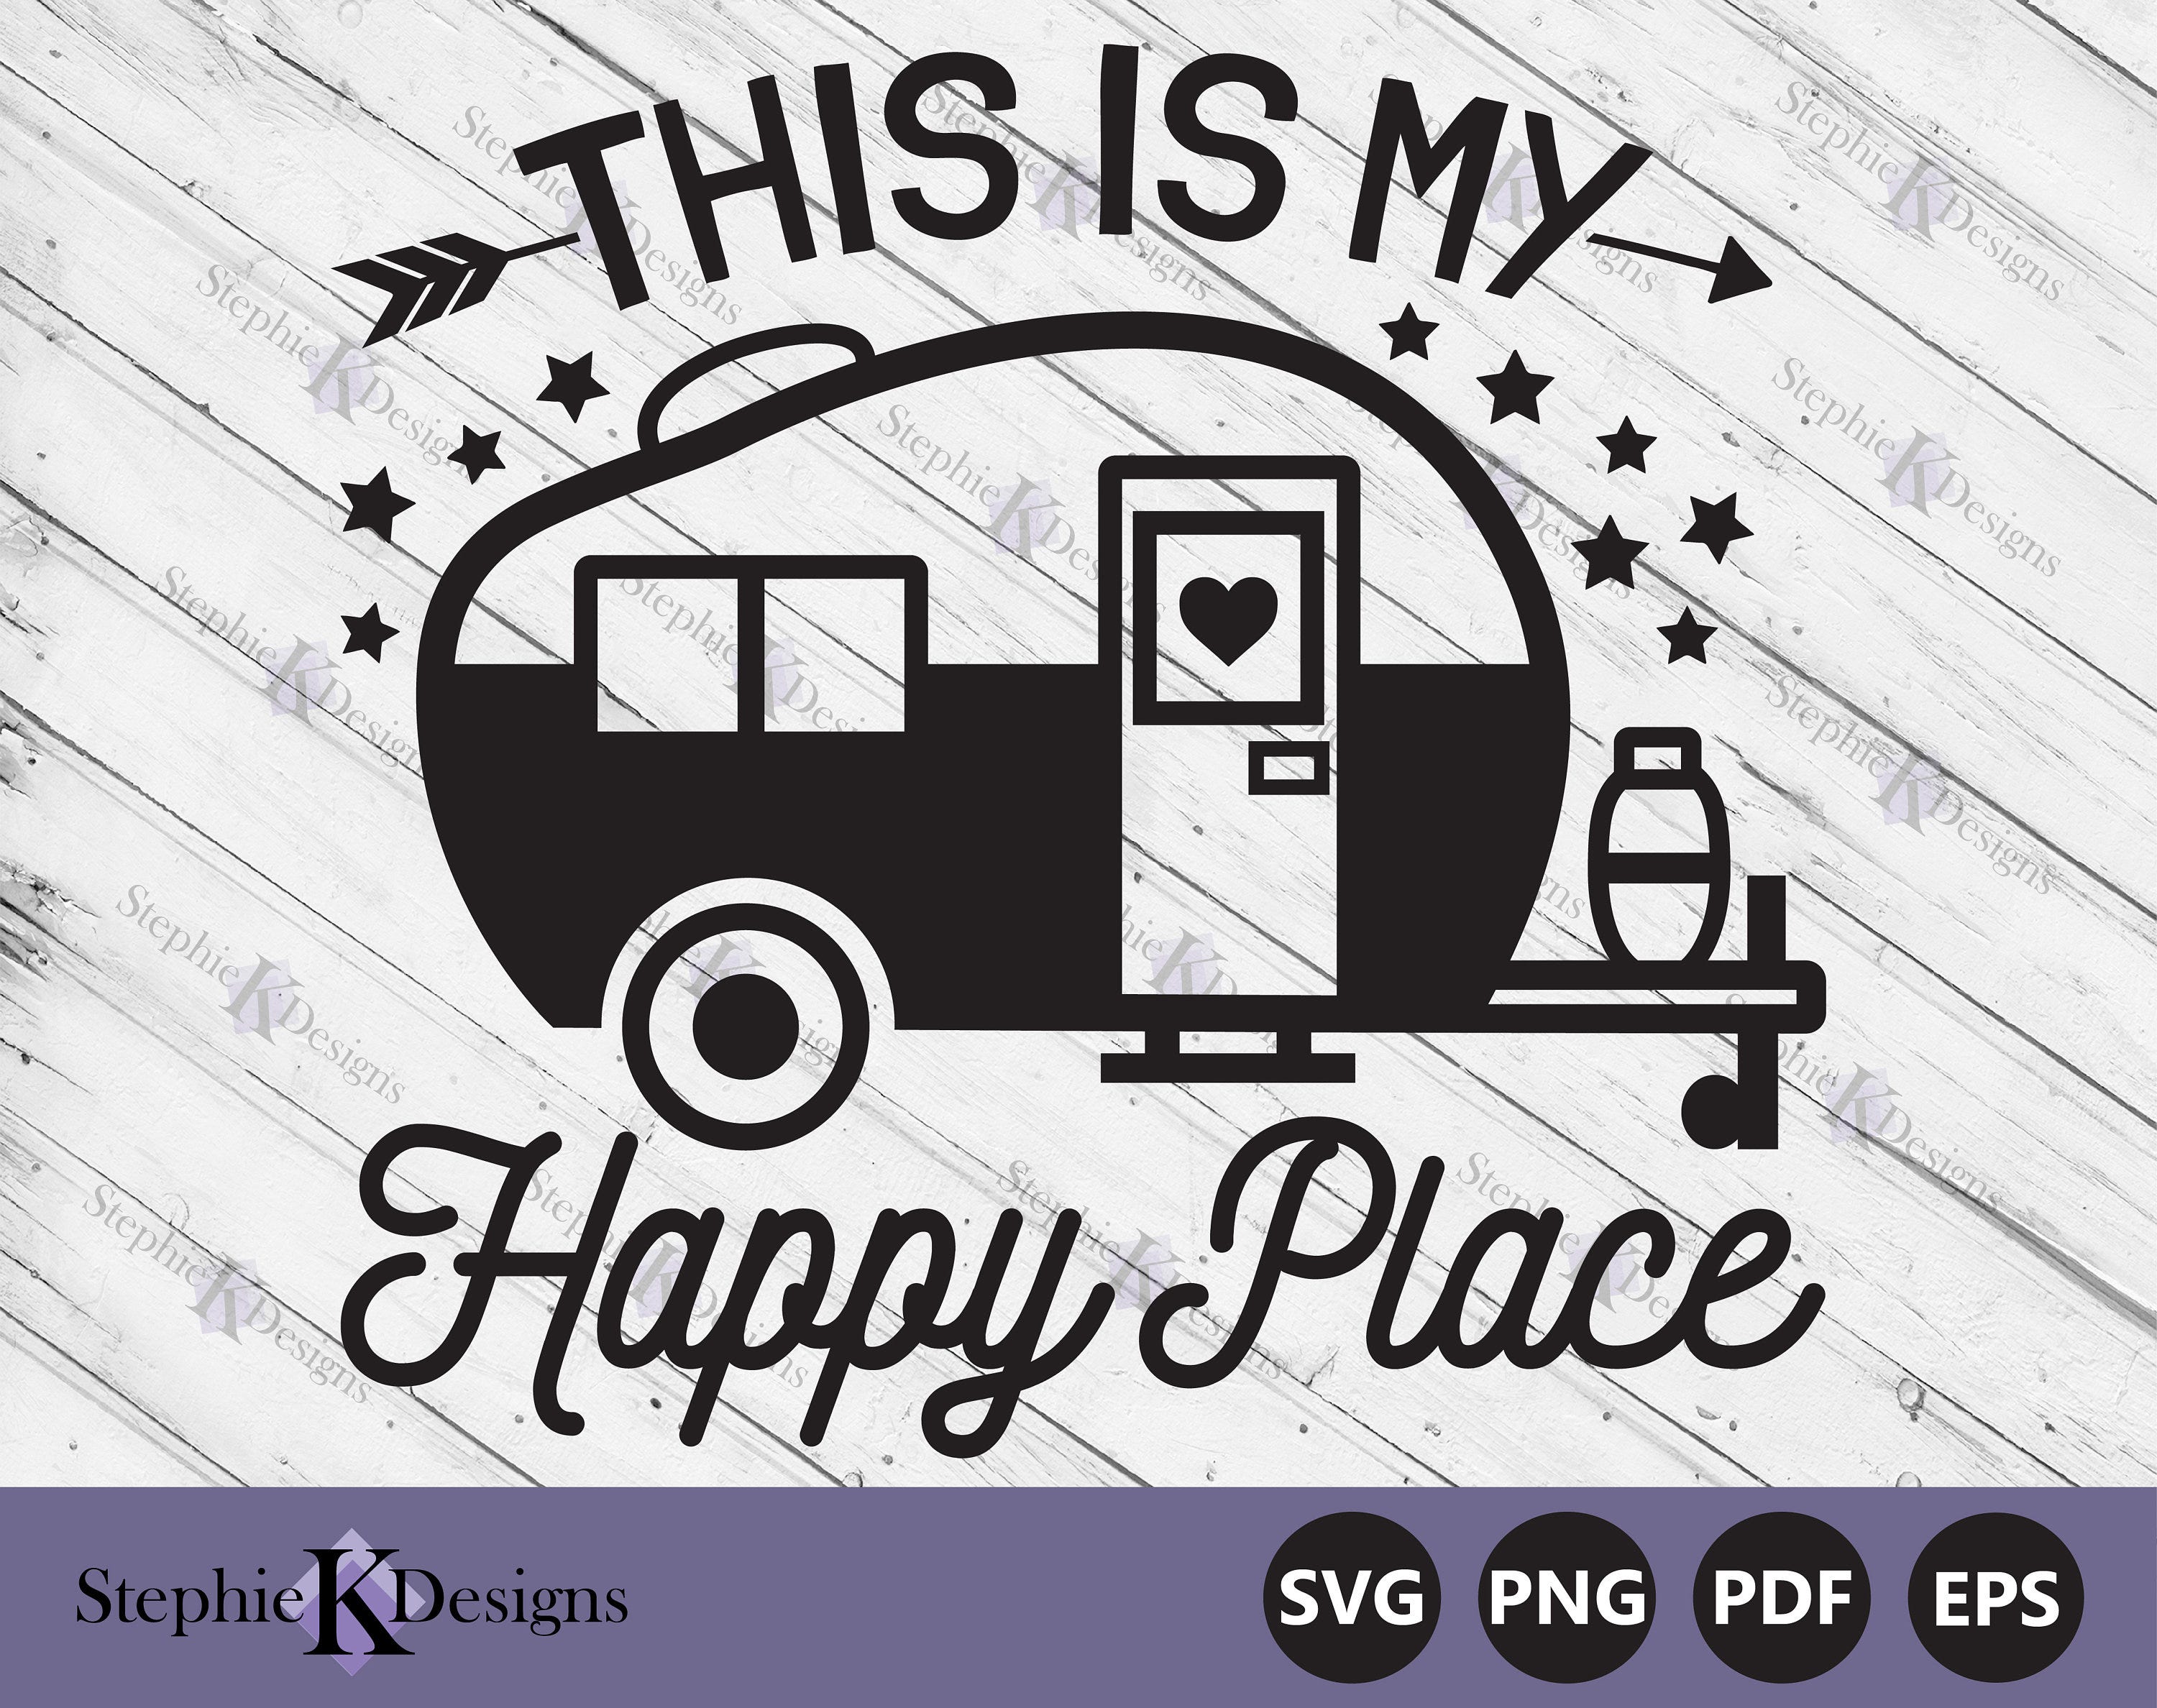 This Is My Happy Place Svg - Camper Sign Svg - Camping Quote Svg - Travel Svg - Camp Life Svg - Cut File For Cricut - Instant Download